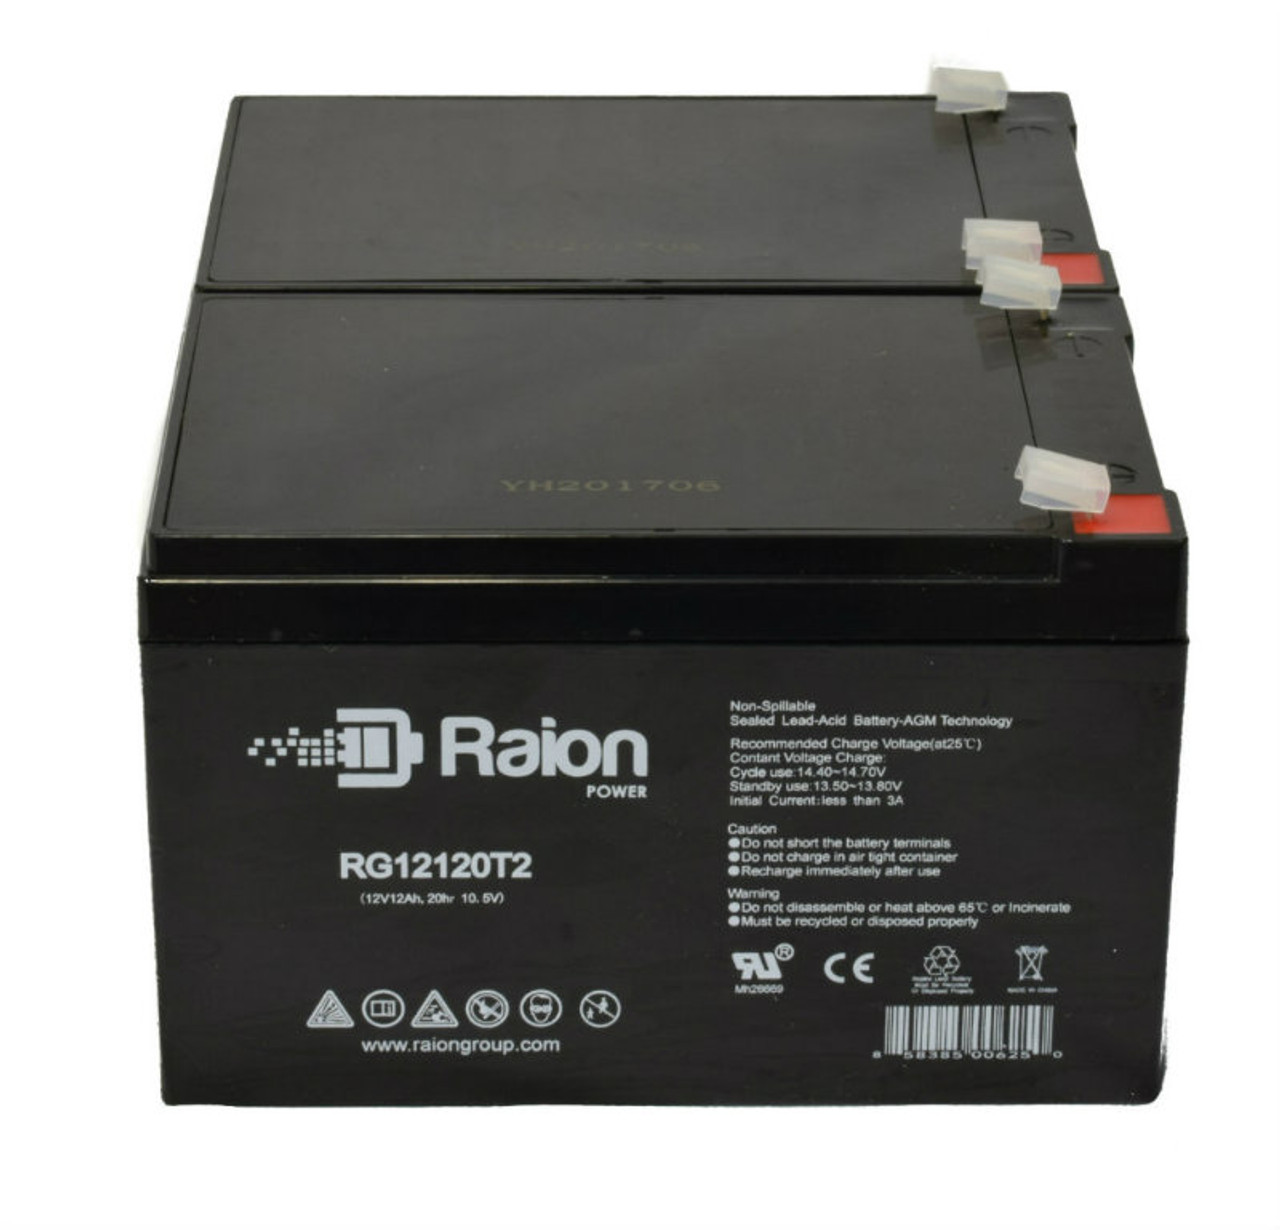 Raion Power 12V 12Ah Non-Spillable Compatible Replacement Battery for New Power NS12-12 - (2 Pack)